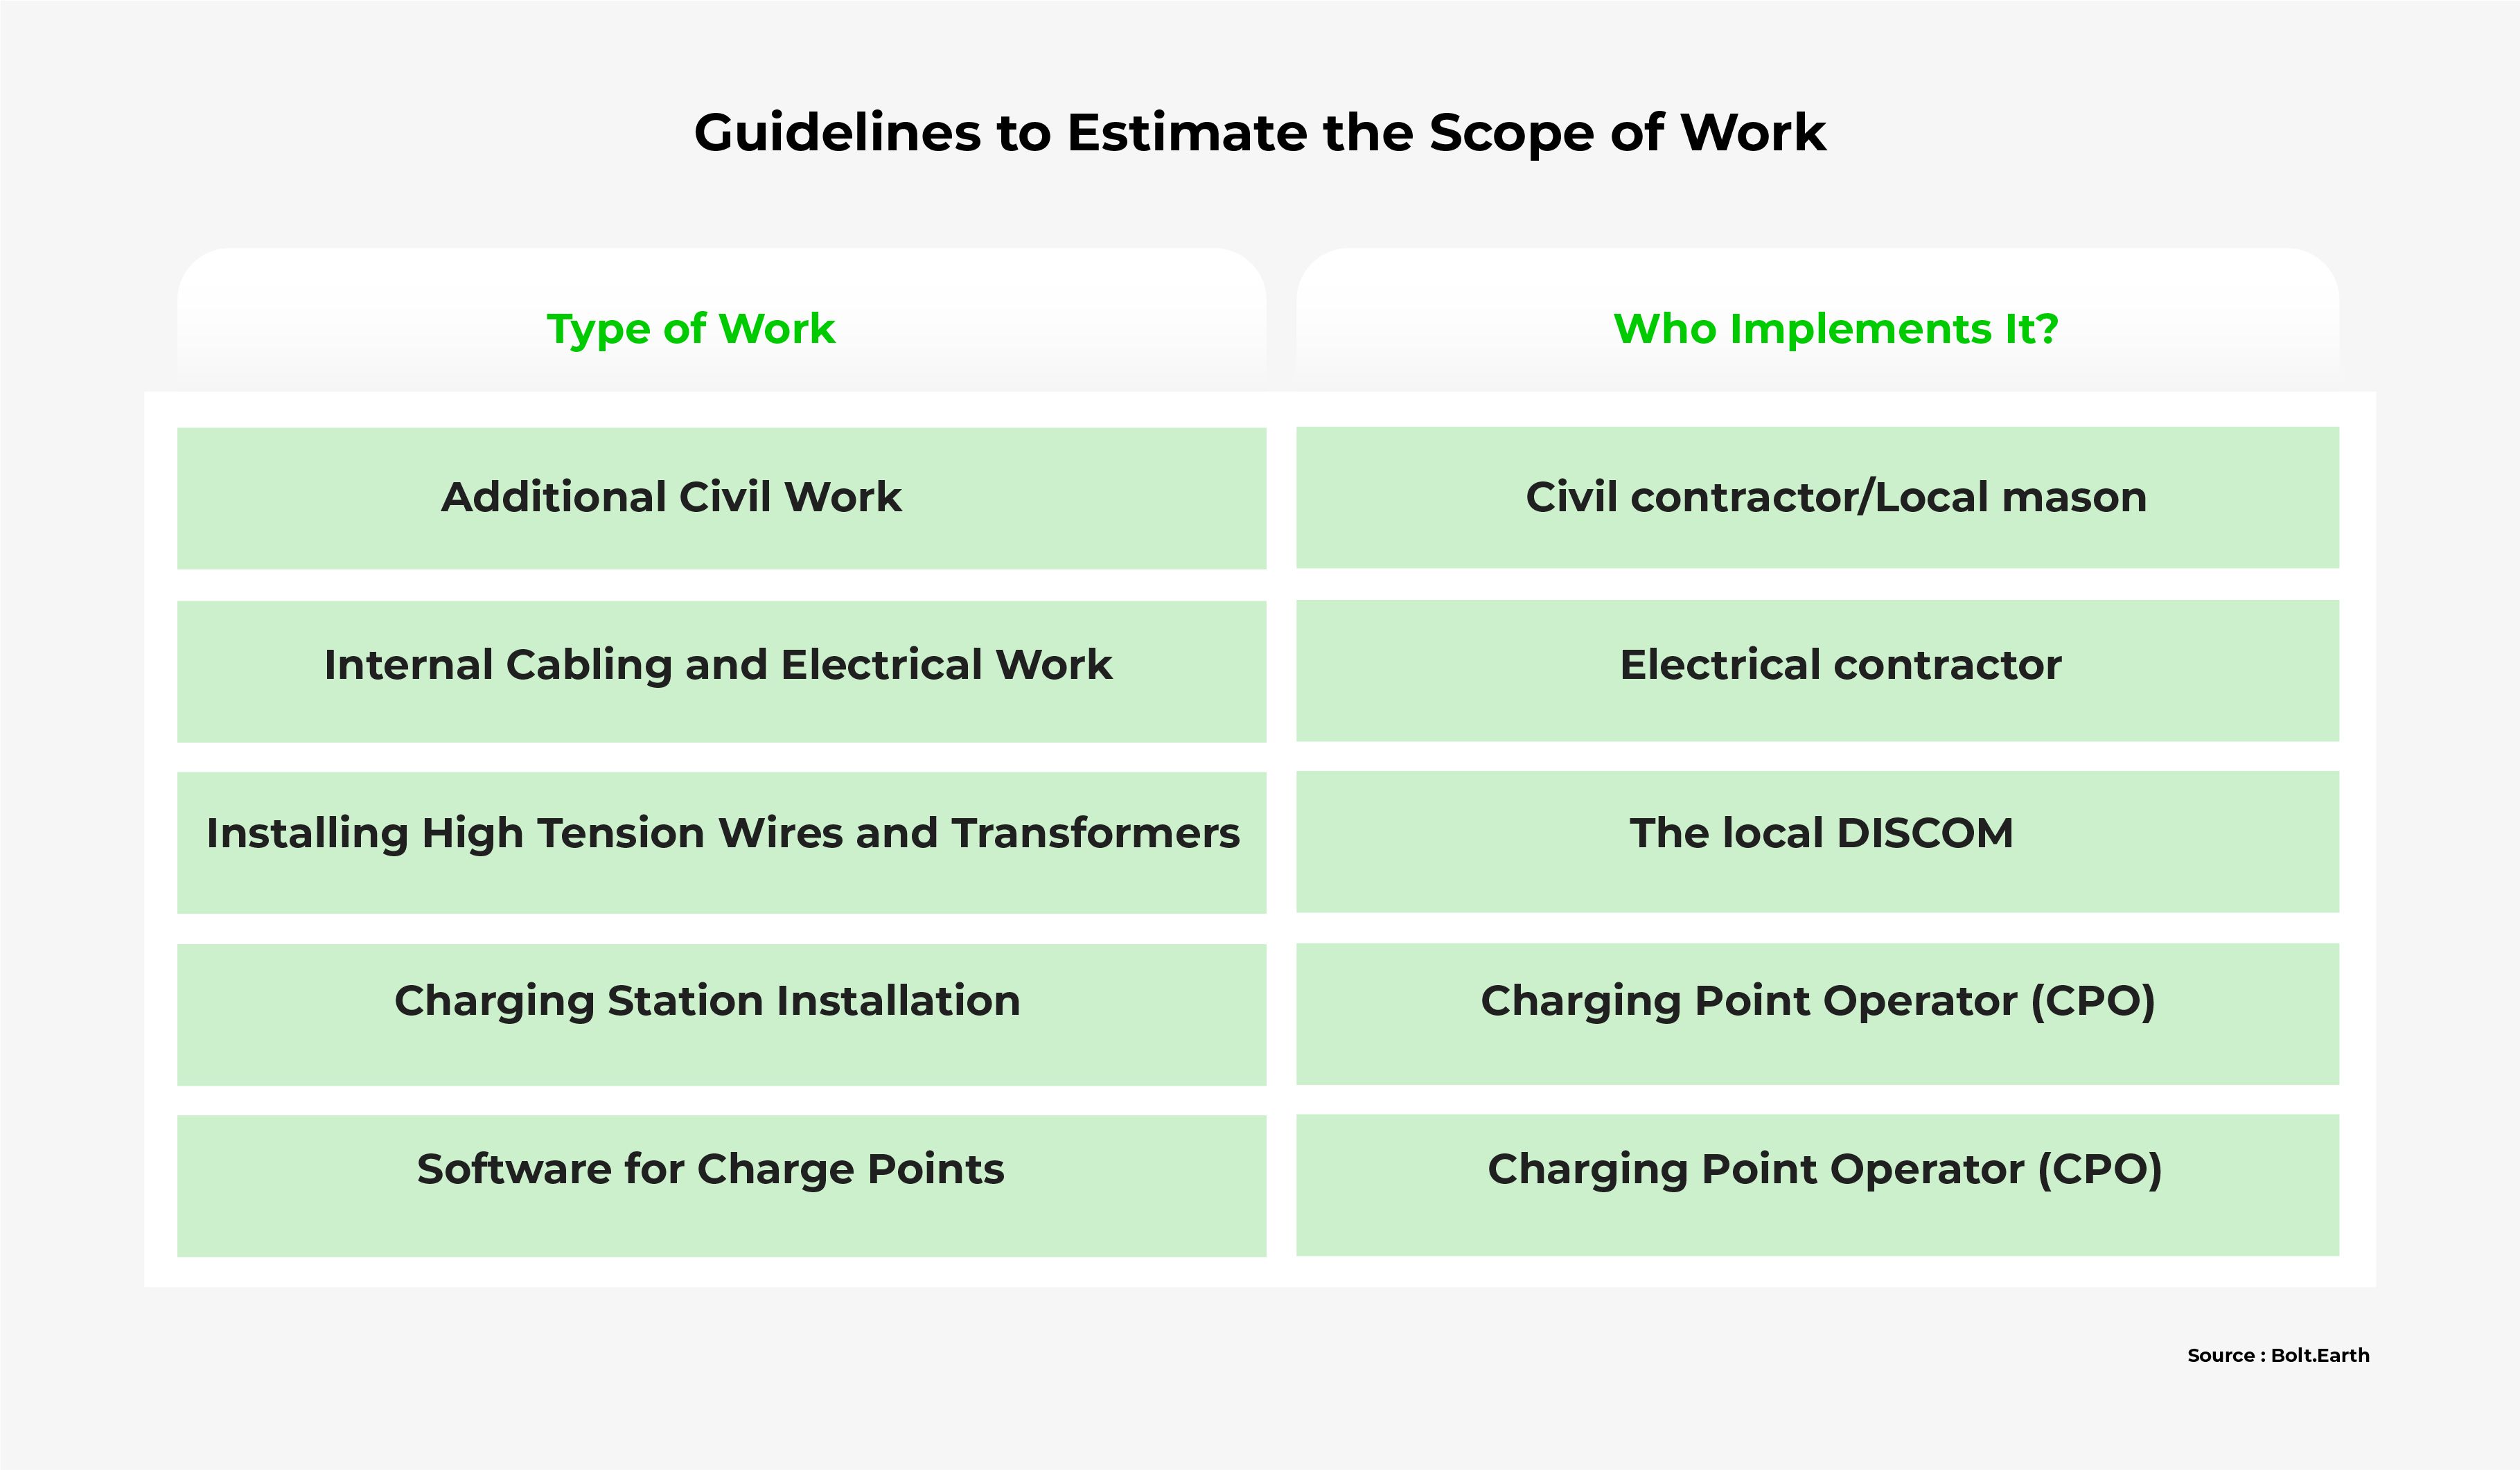 Image that shows guidelines to follow when estimating the scope of work. It is divided into two columns: type of work, and who implements it